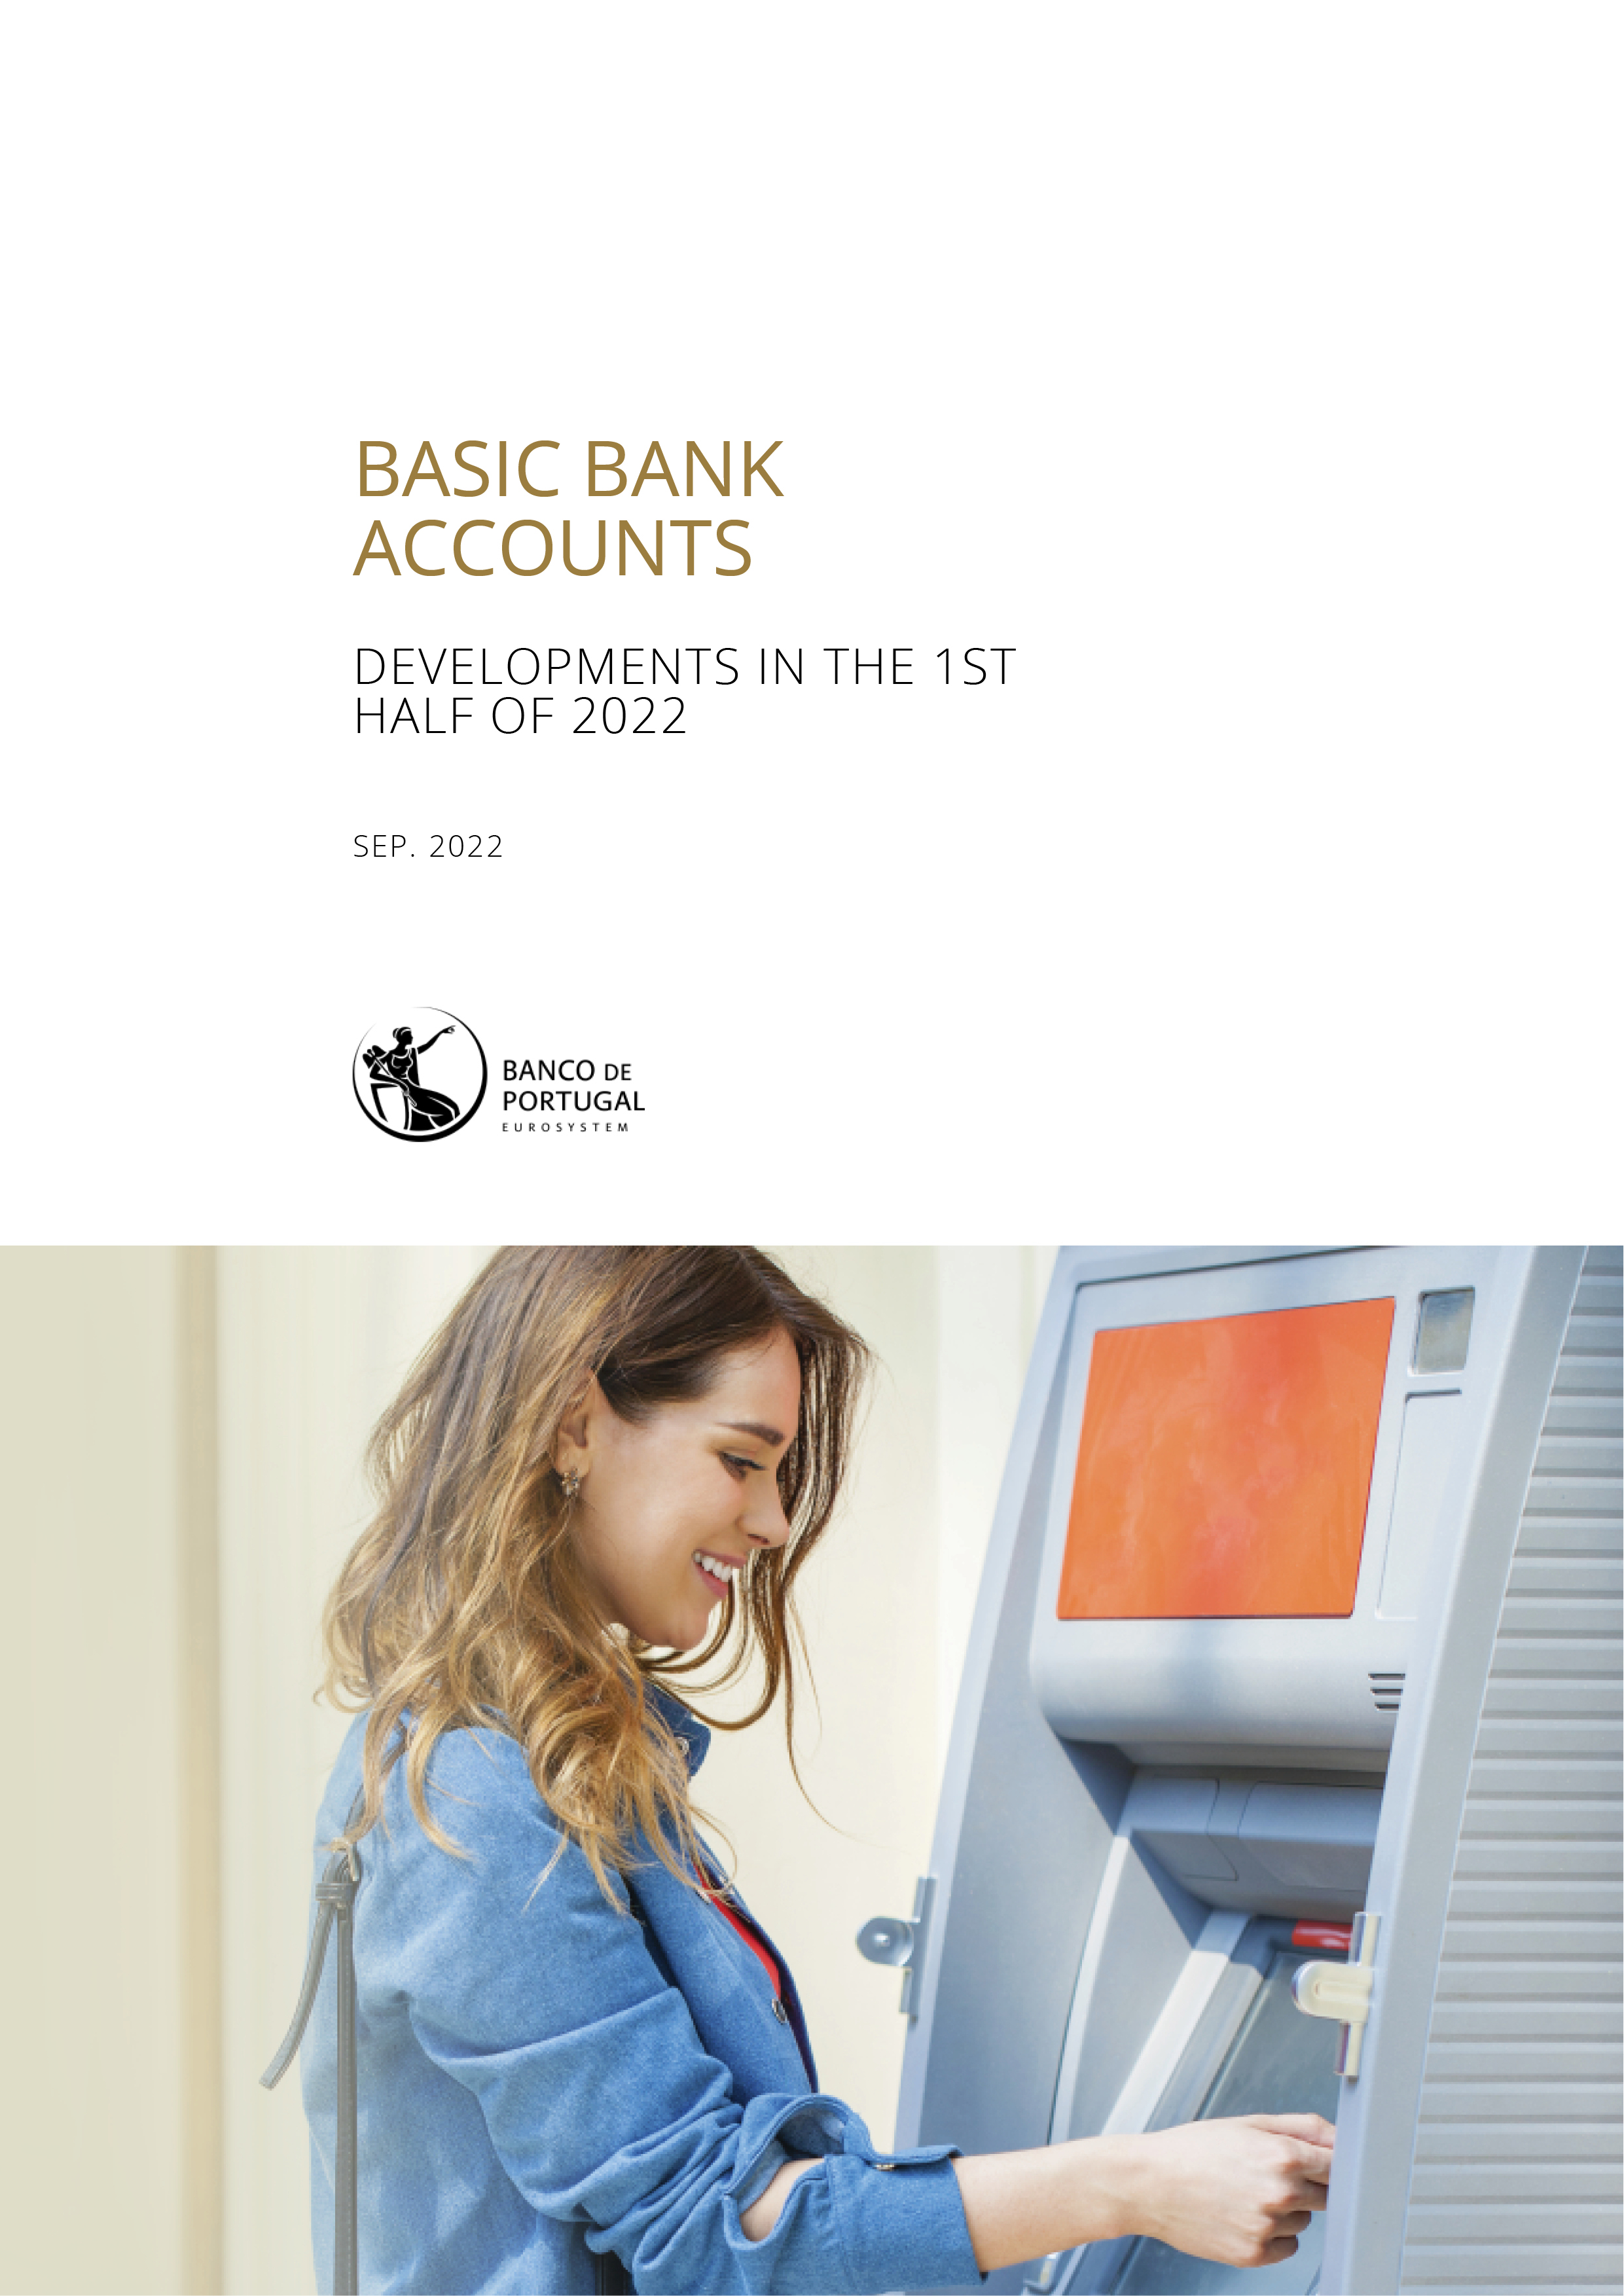 Developments of basic bank accounts in the 1st half of 2022